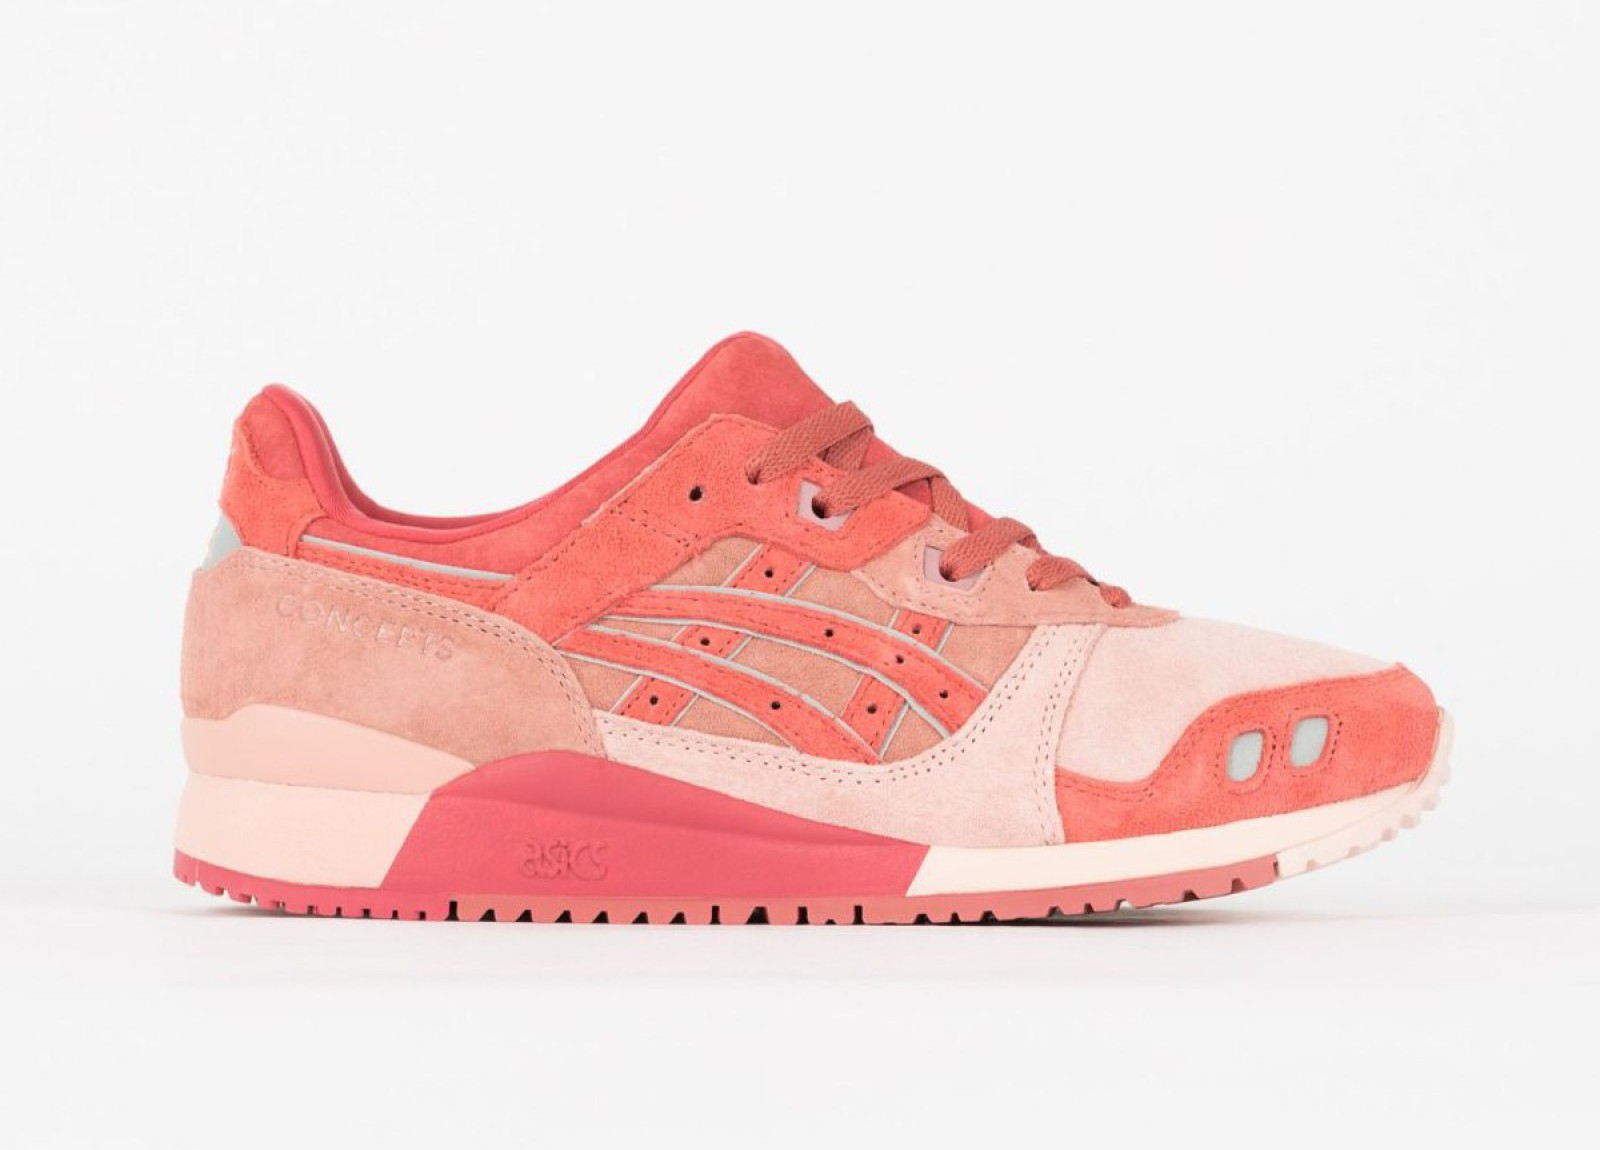 Concepts x Asics
Gel Lyte III
Coral / Silver